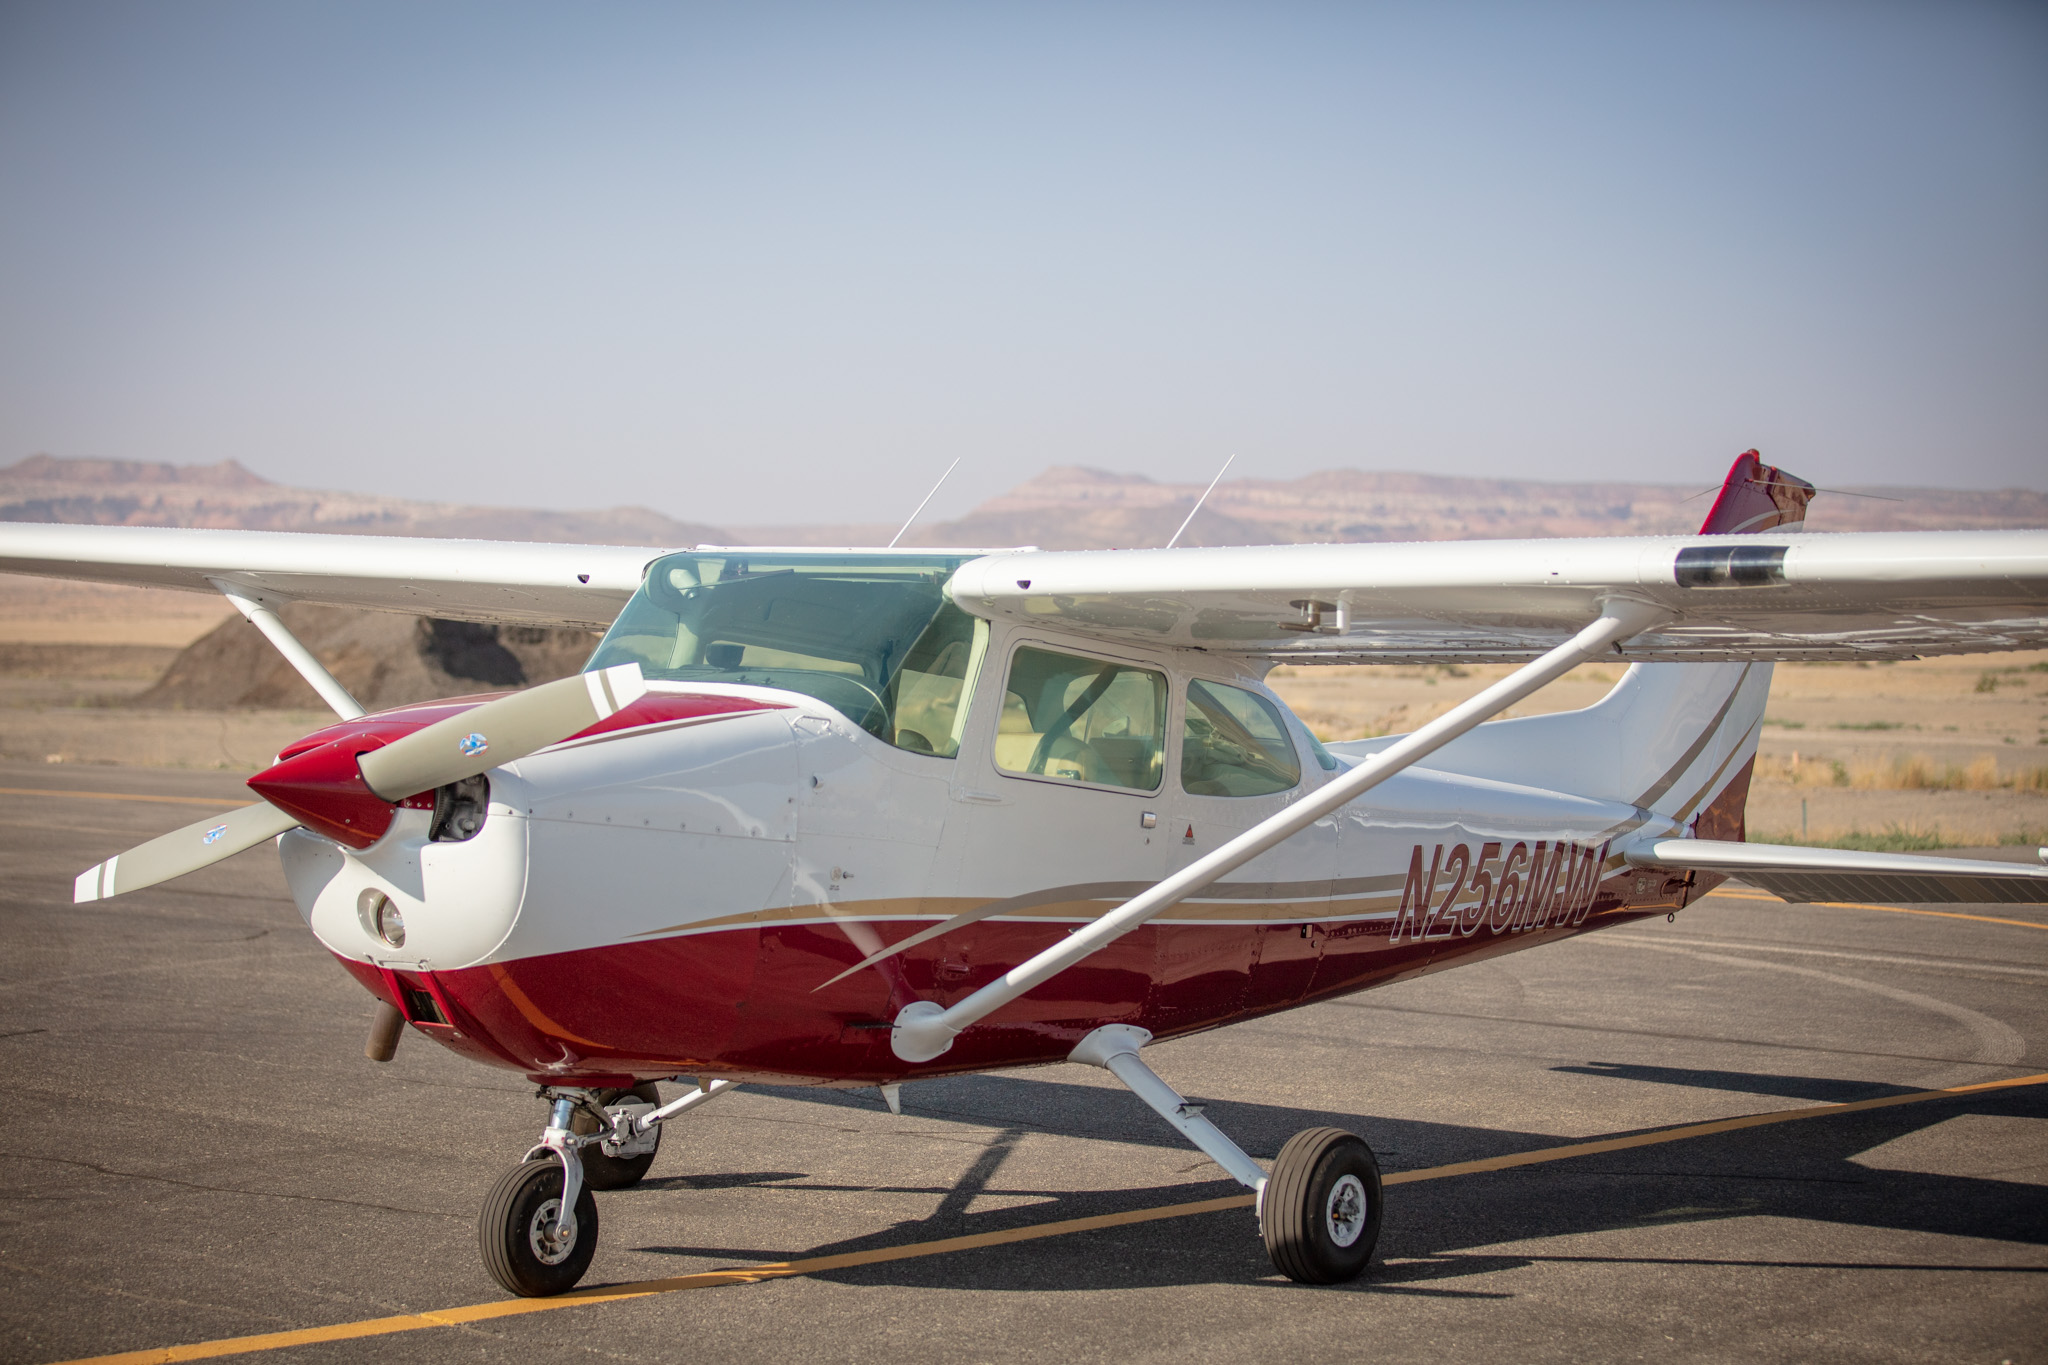 Small aircraft in Moab